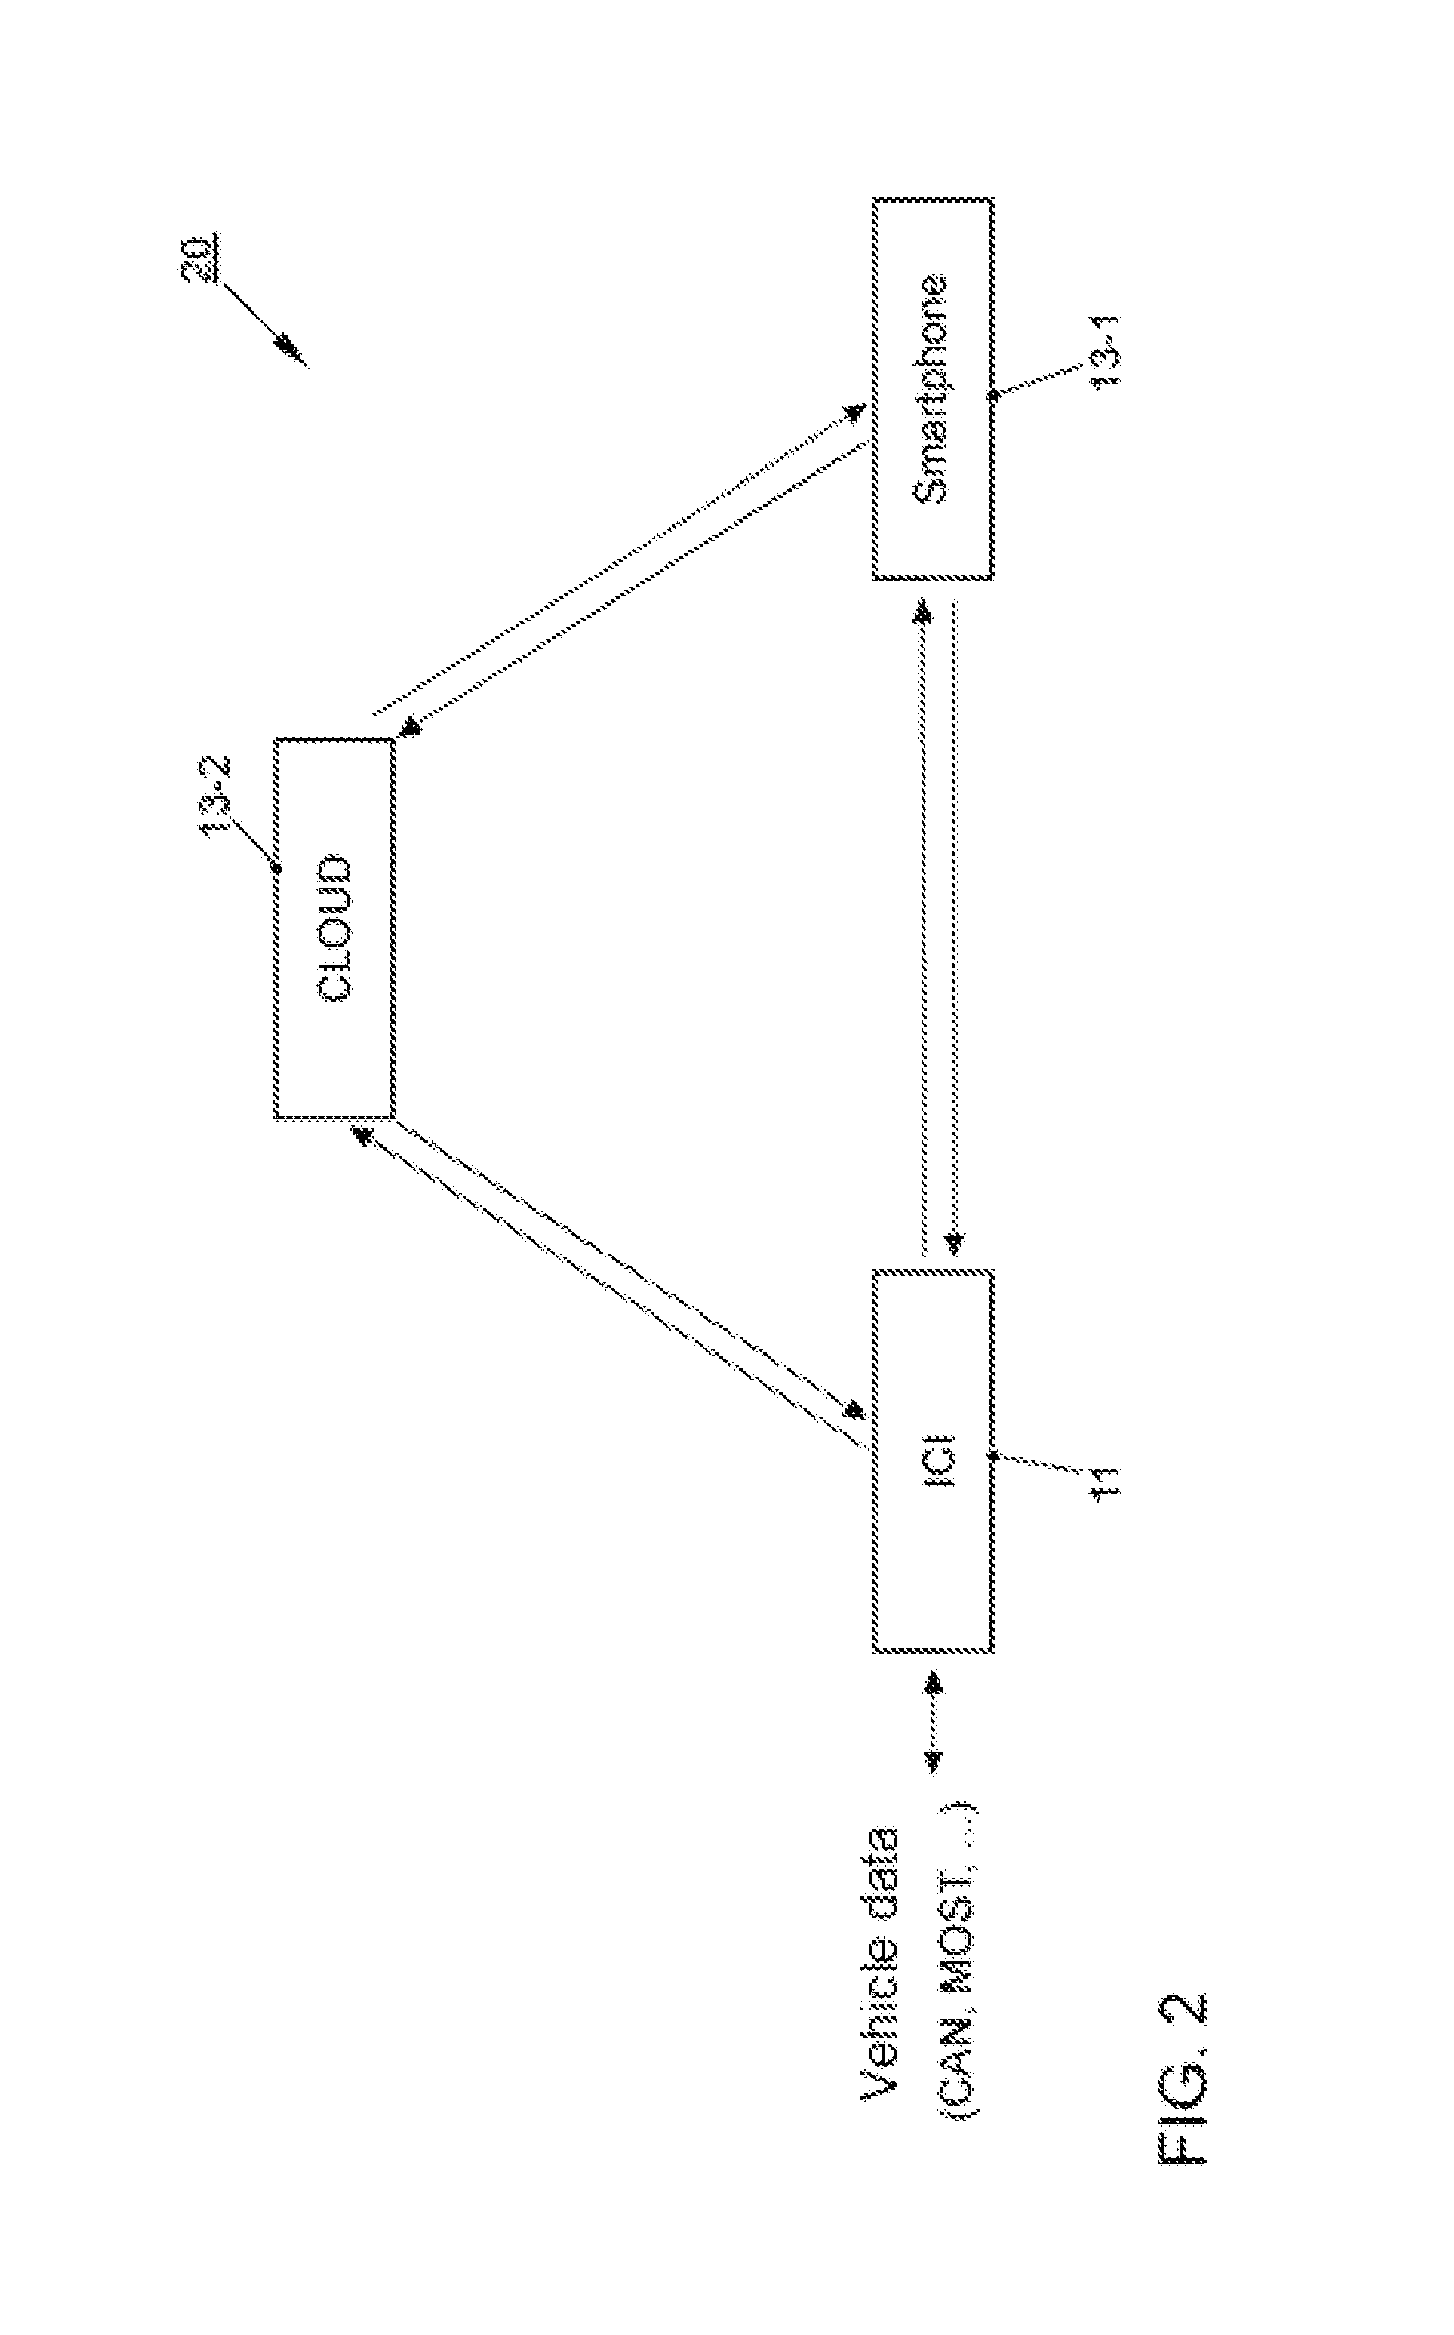 Device and method for providing multimedia data in a motor vehicle